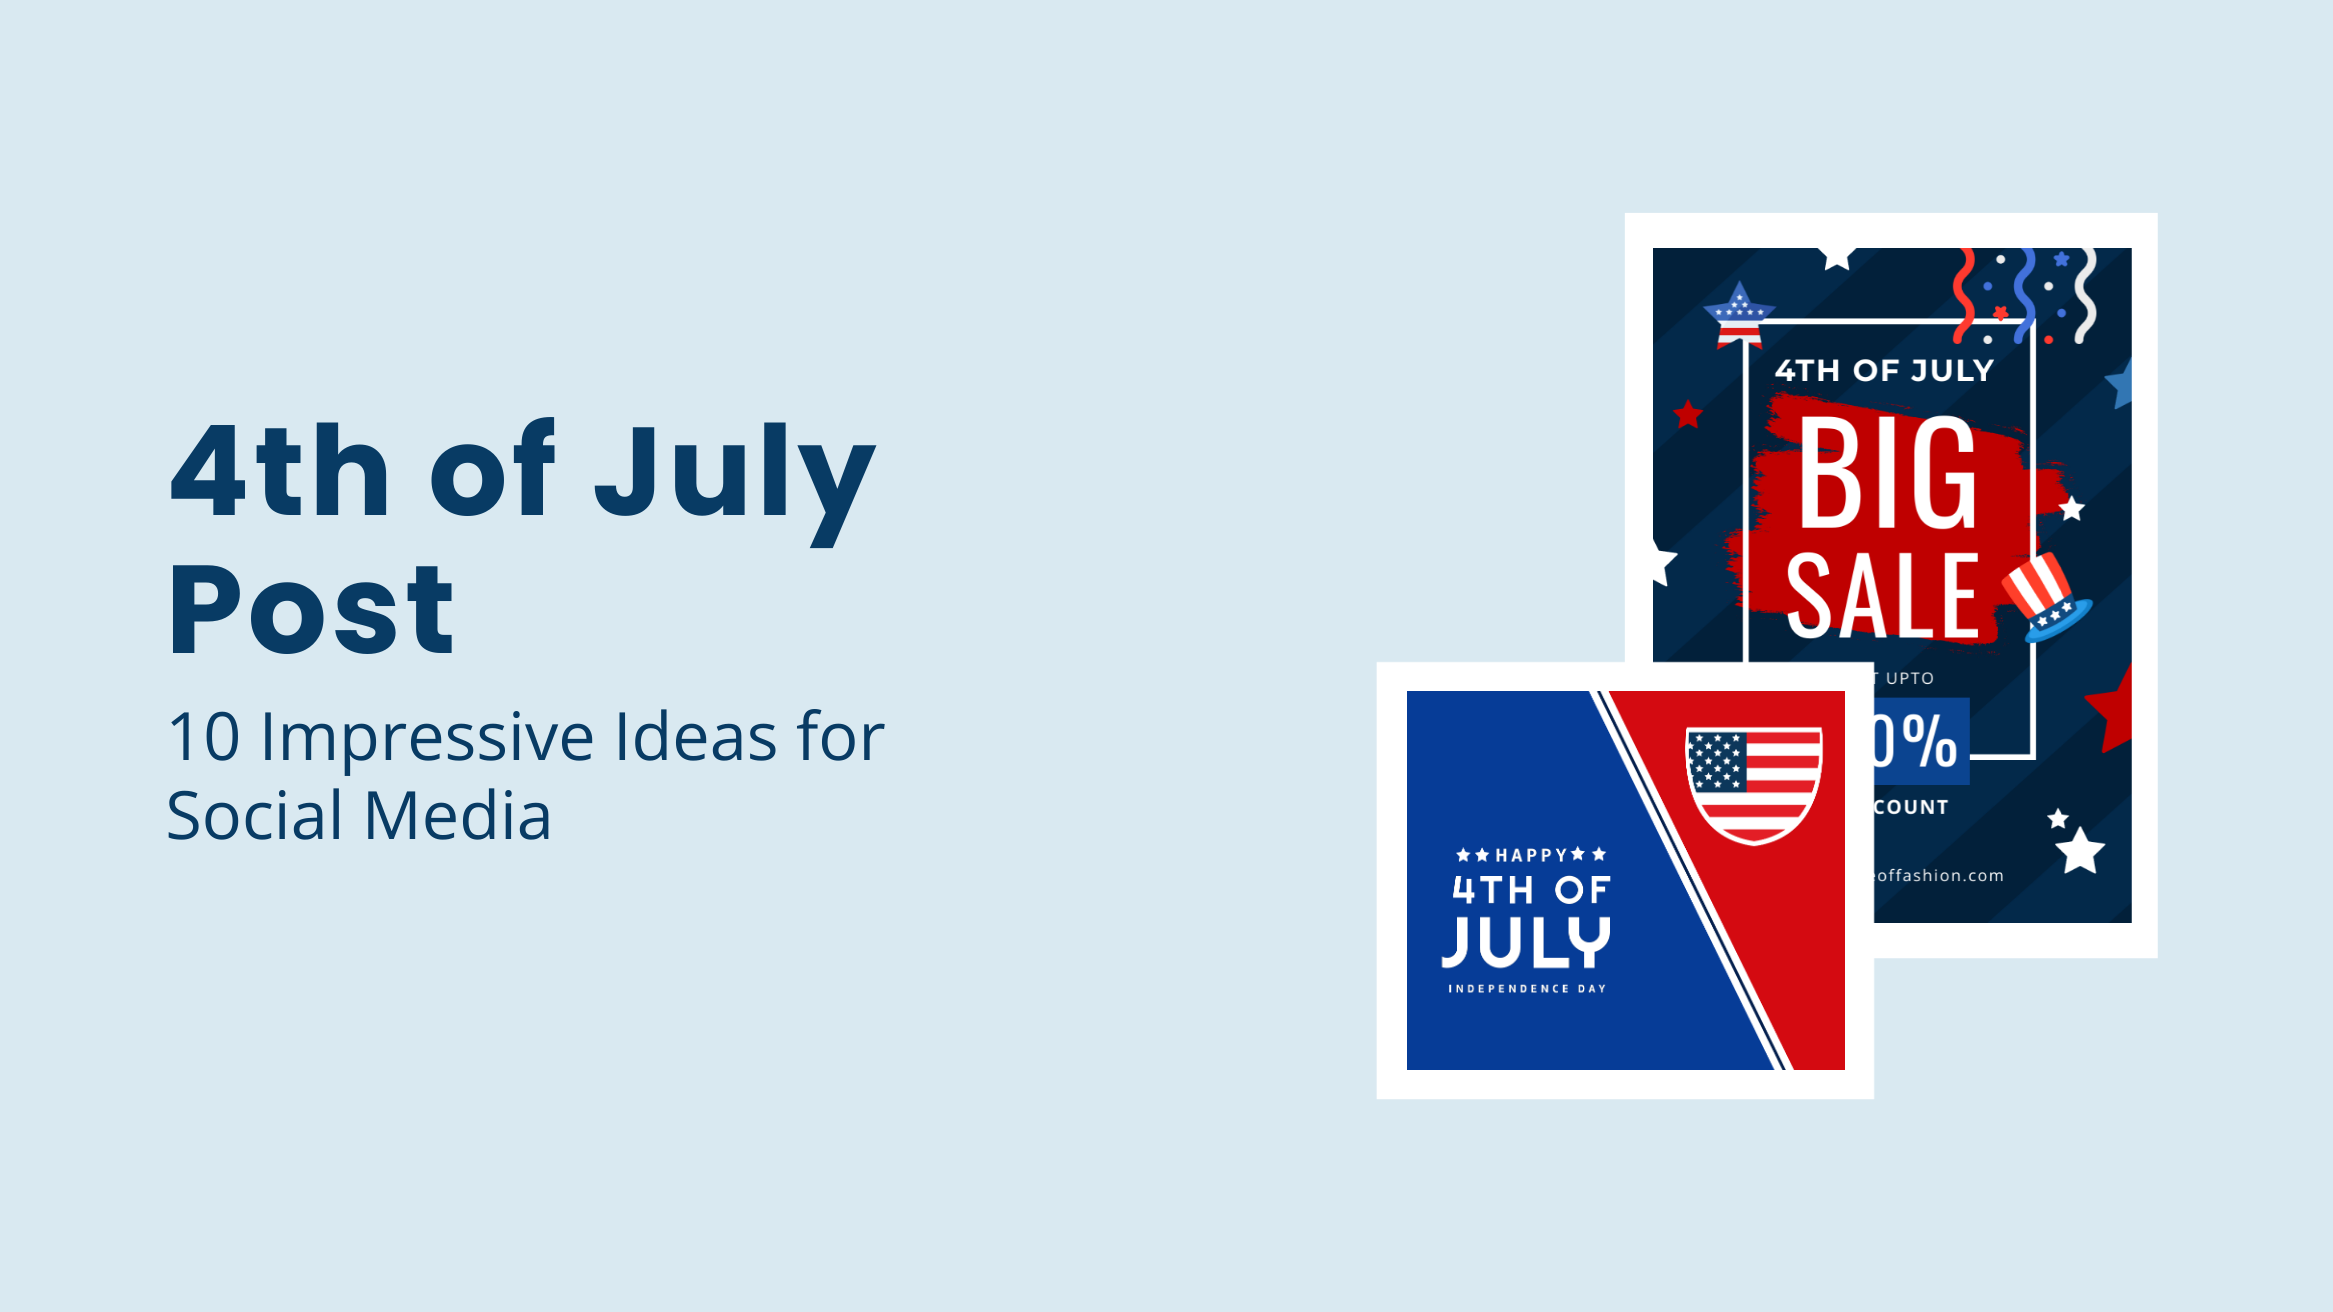 4th of July Post 10 Impressive Ideas for Social Media to Inspire Your Audience